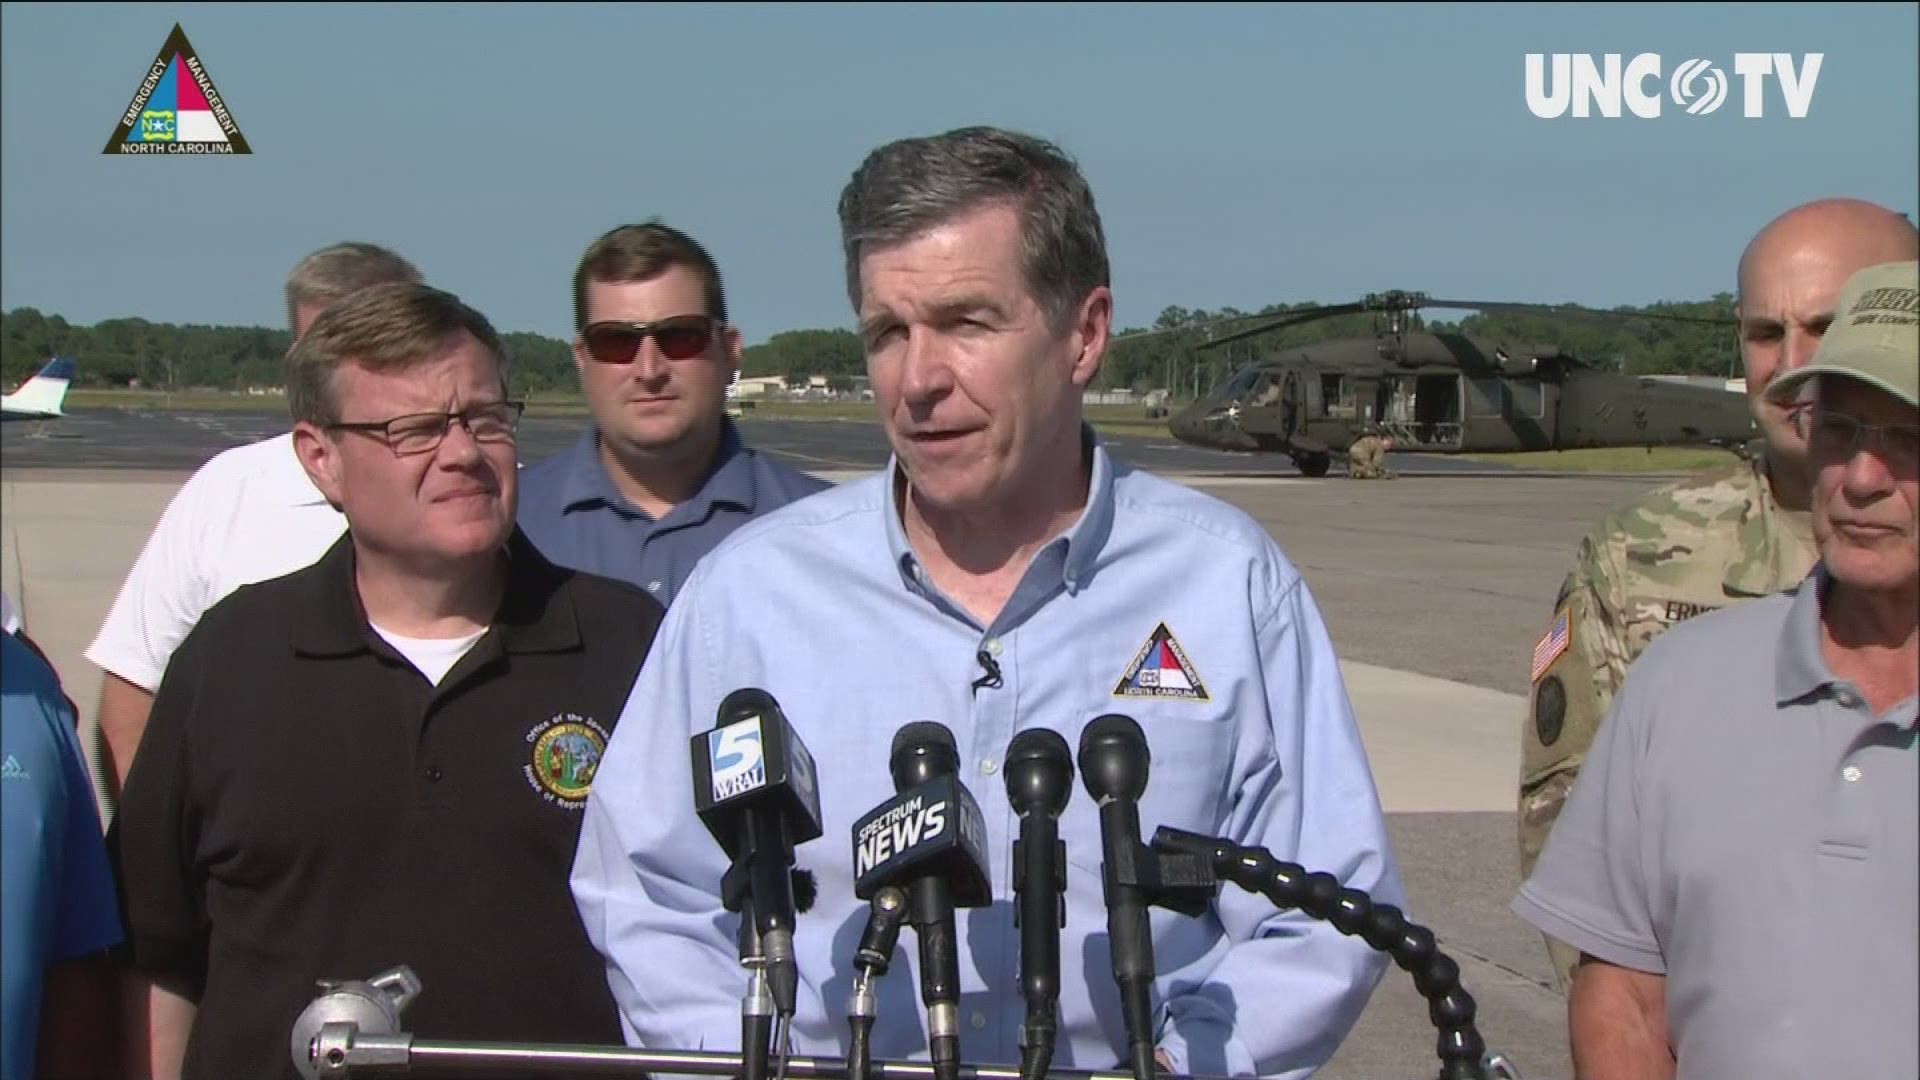 After a day touring damage at Emerald Isle and Ocracoke island, Governor Cooper spoke to the media.